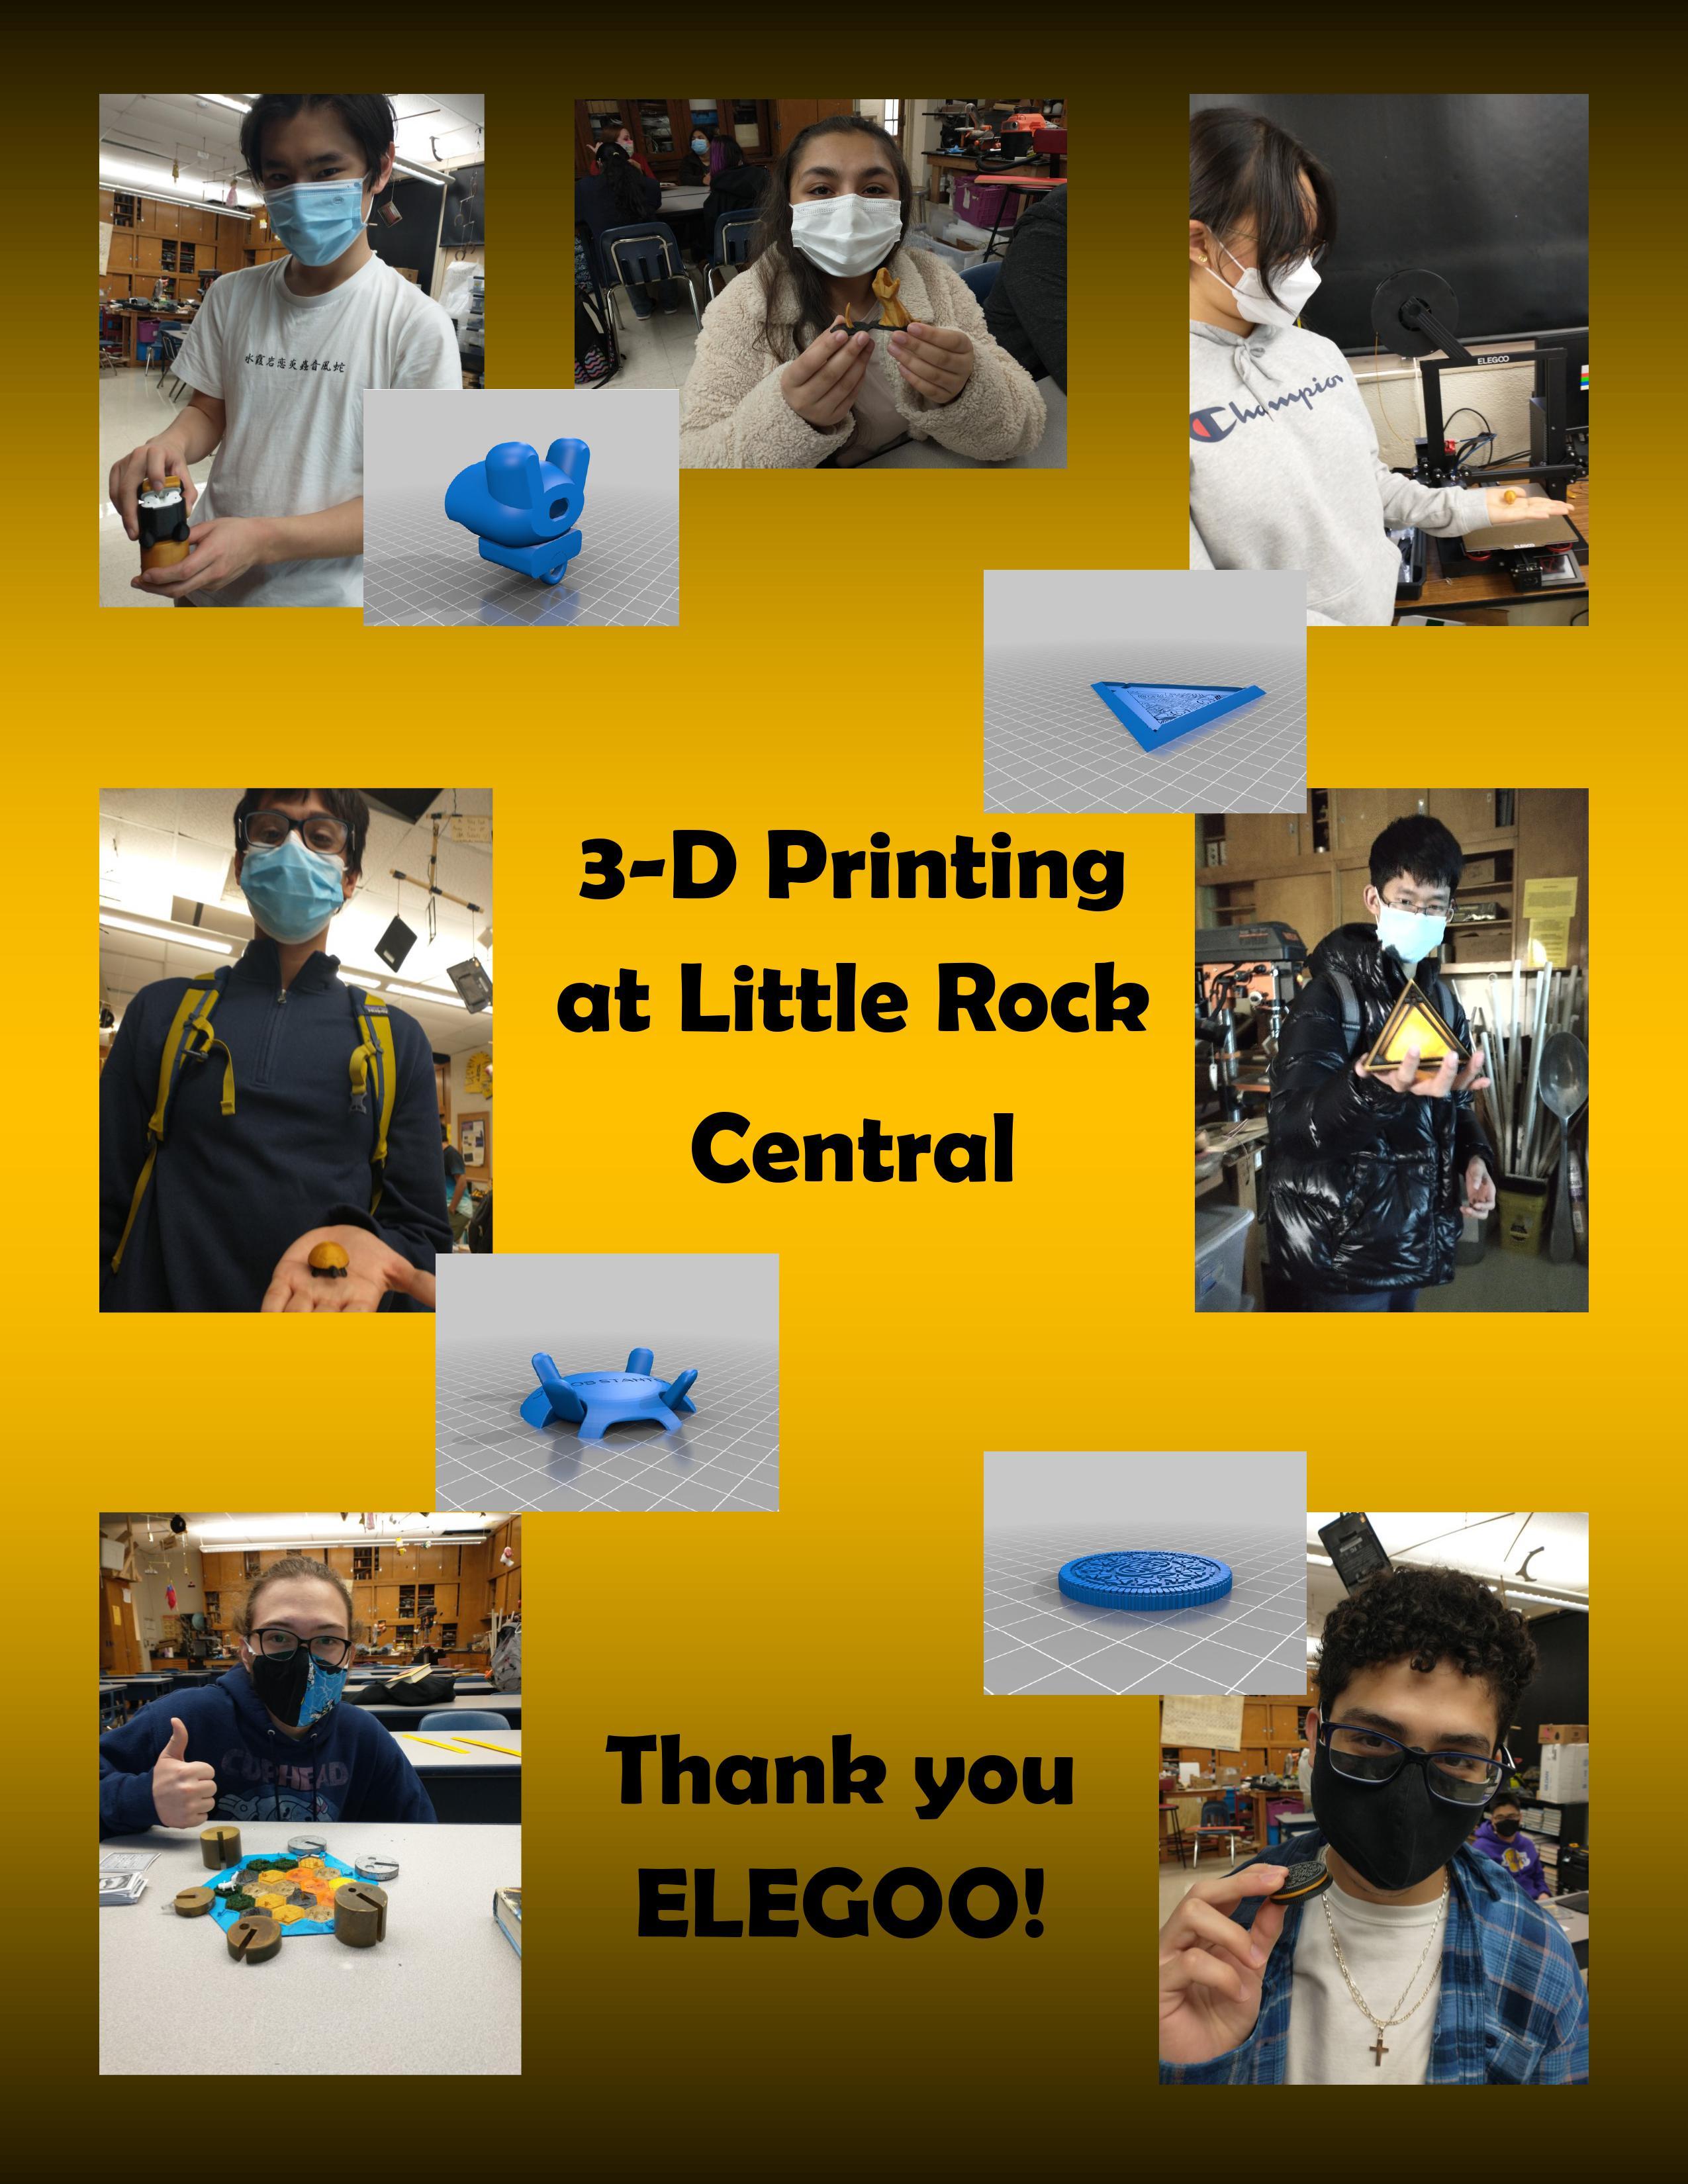 ELEGOO Established Sponsorship with Little Rock Central High School to help students learn 3D Printing